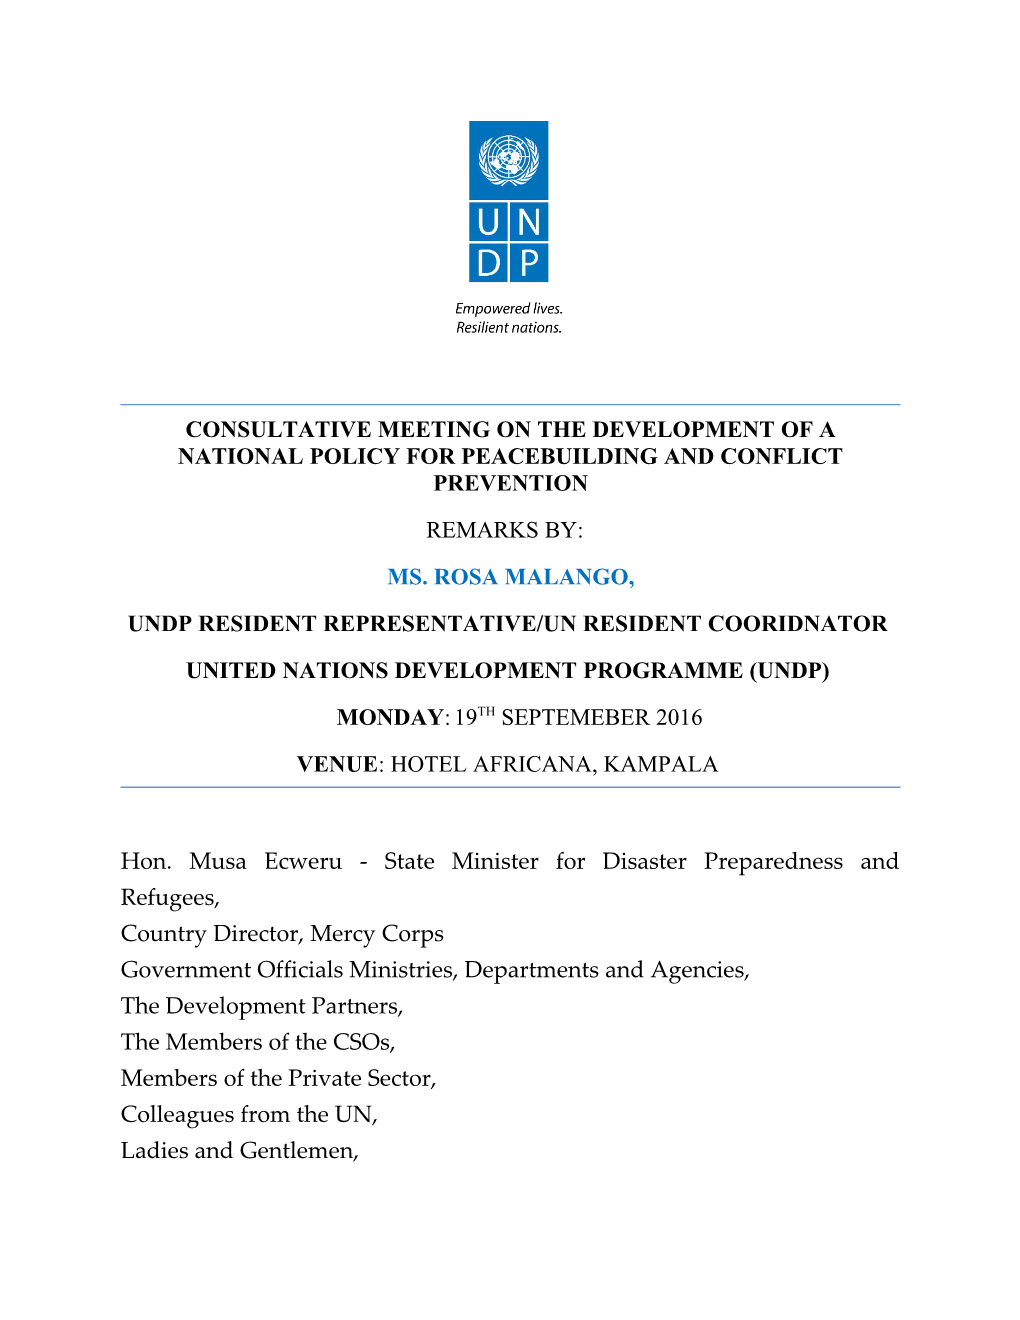 Consultative Meeting on the Development of a National Policy for Peacebuilding and Conflict